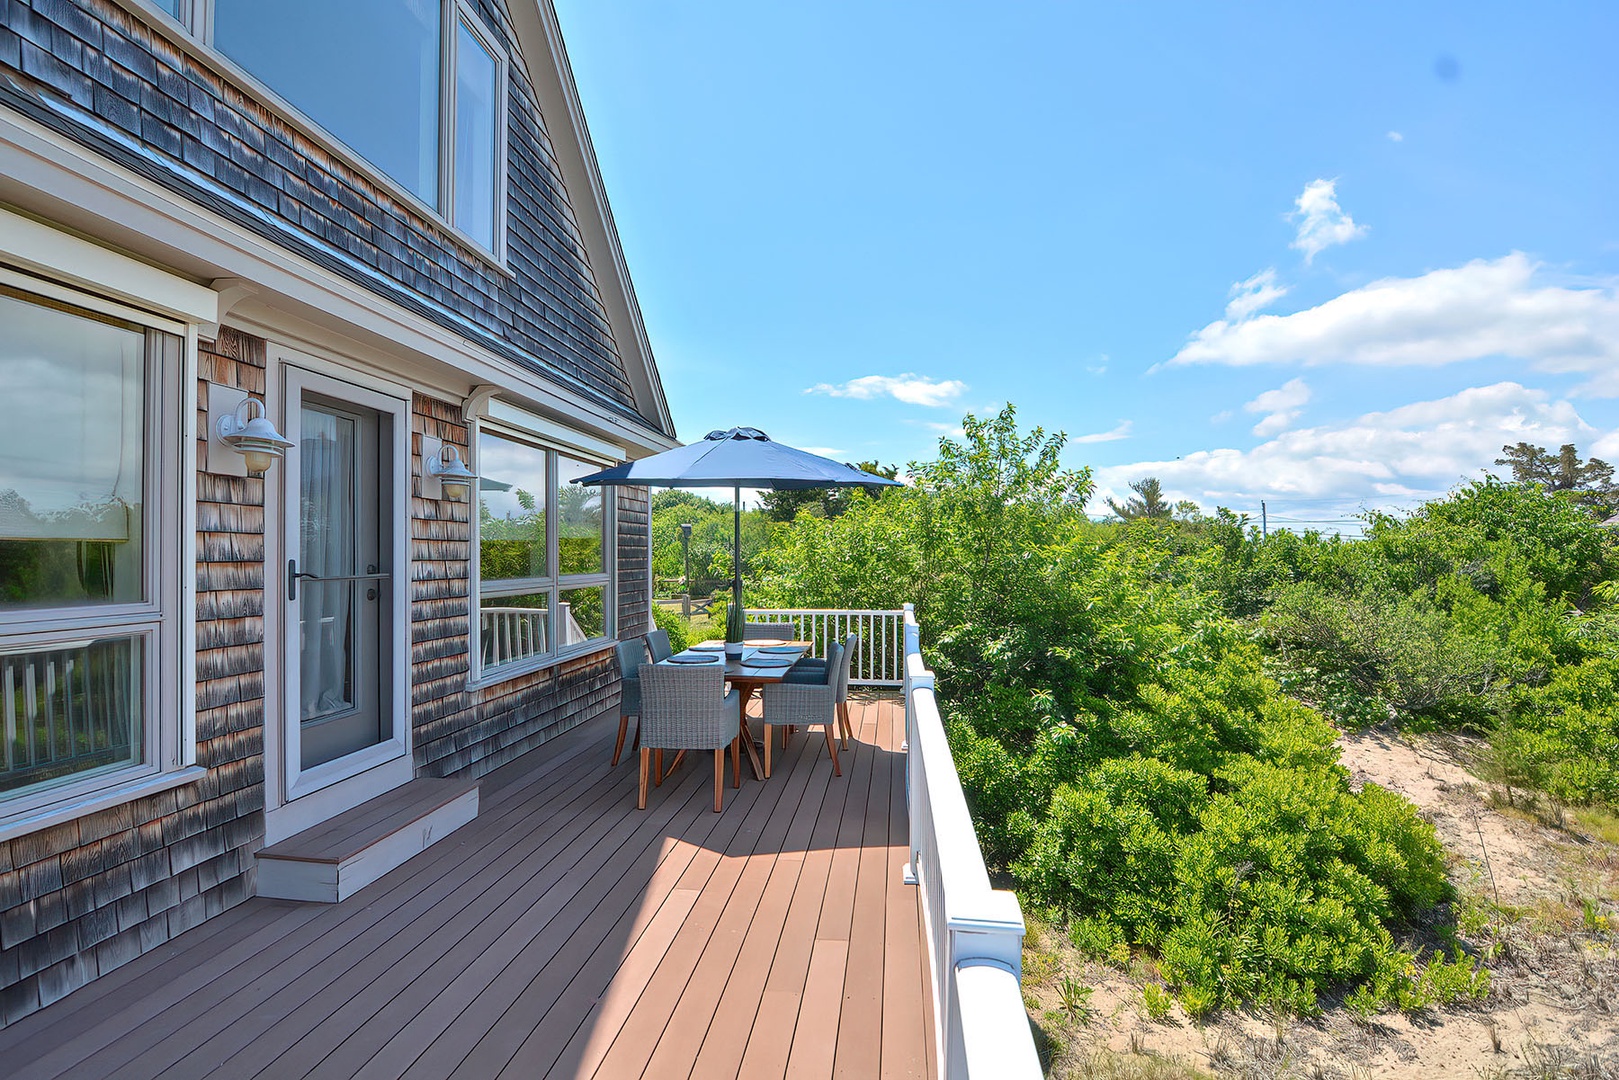 Dine or relax on the front deck.